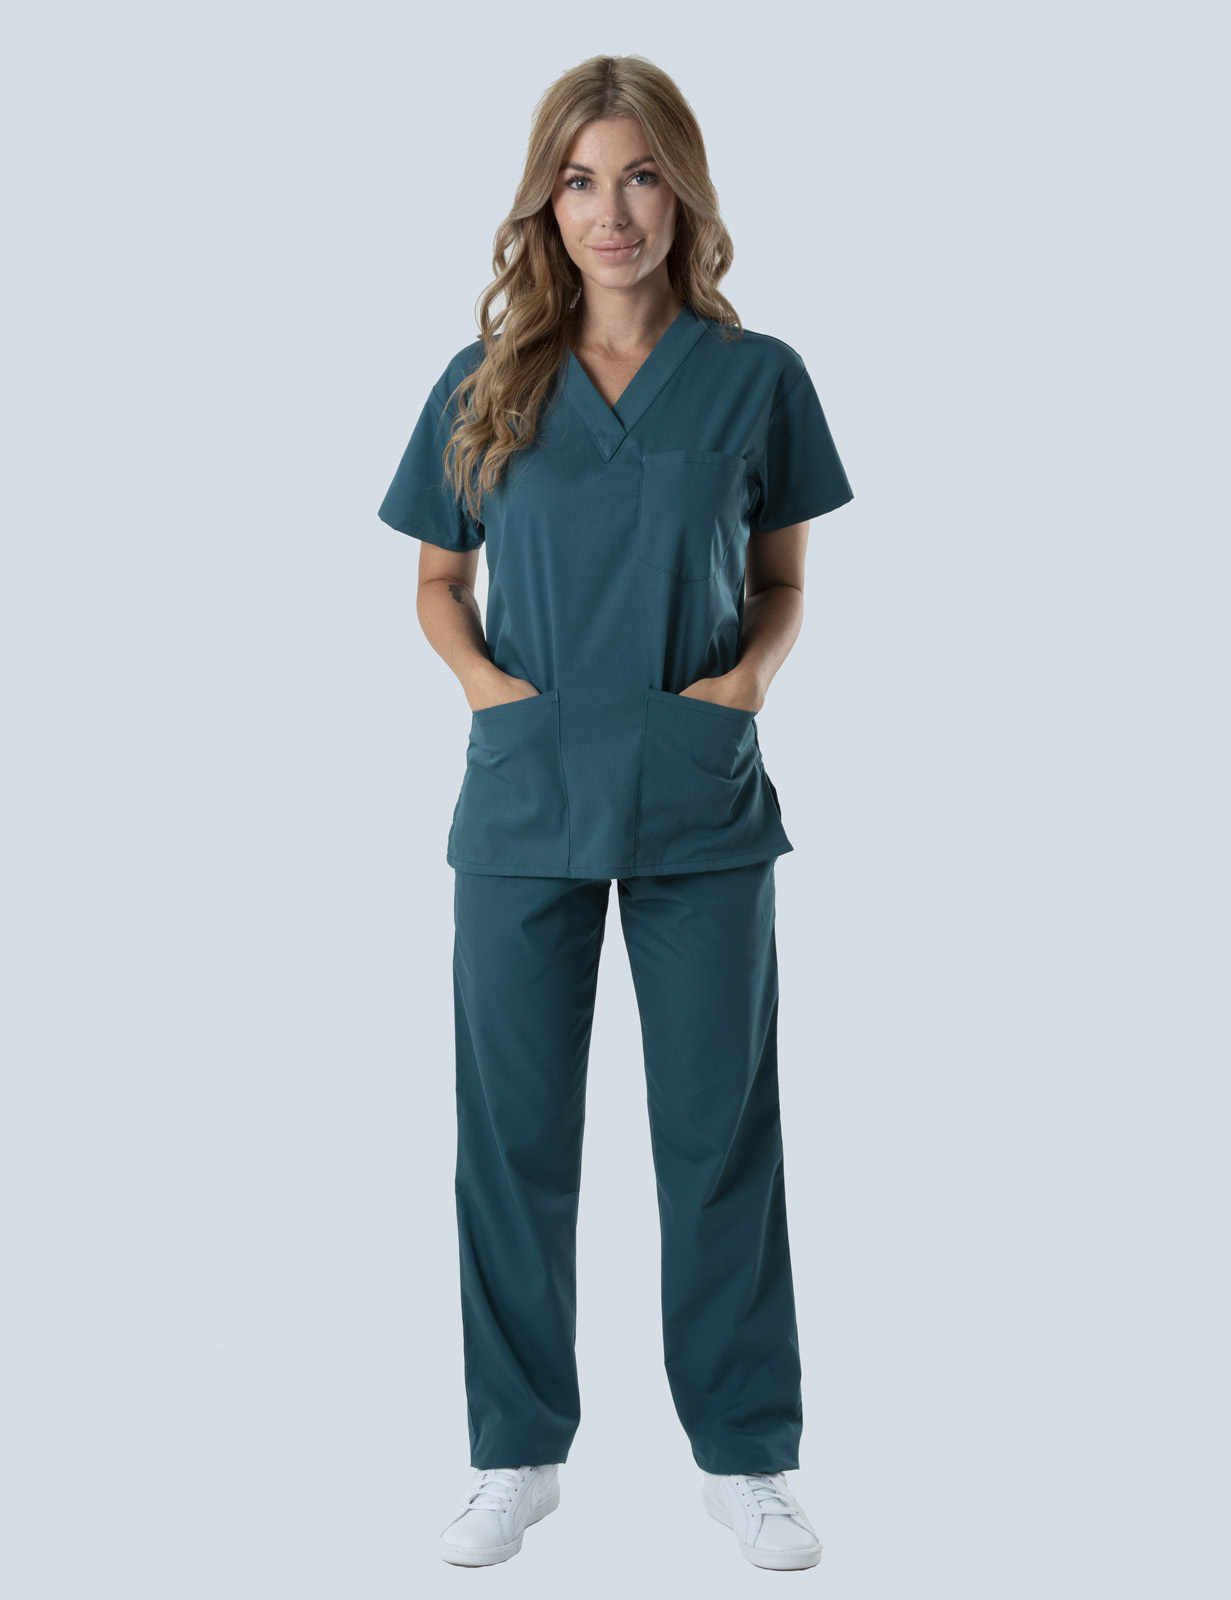 Ipswich Hospital Occupational Therapy-Allied Health Assistant Uniform Set Bundle ( 4 Pocket Scrub Top And Cargo Scrub Pants In Caribbean + 2 Logos